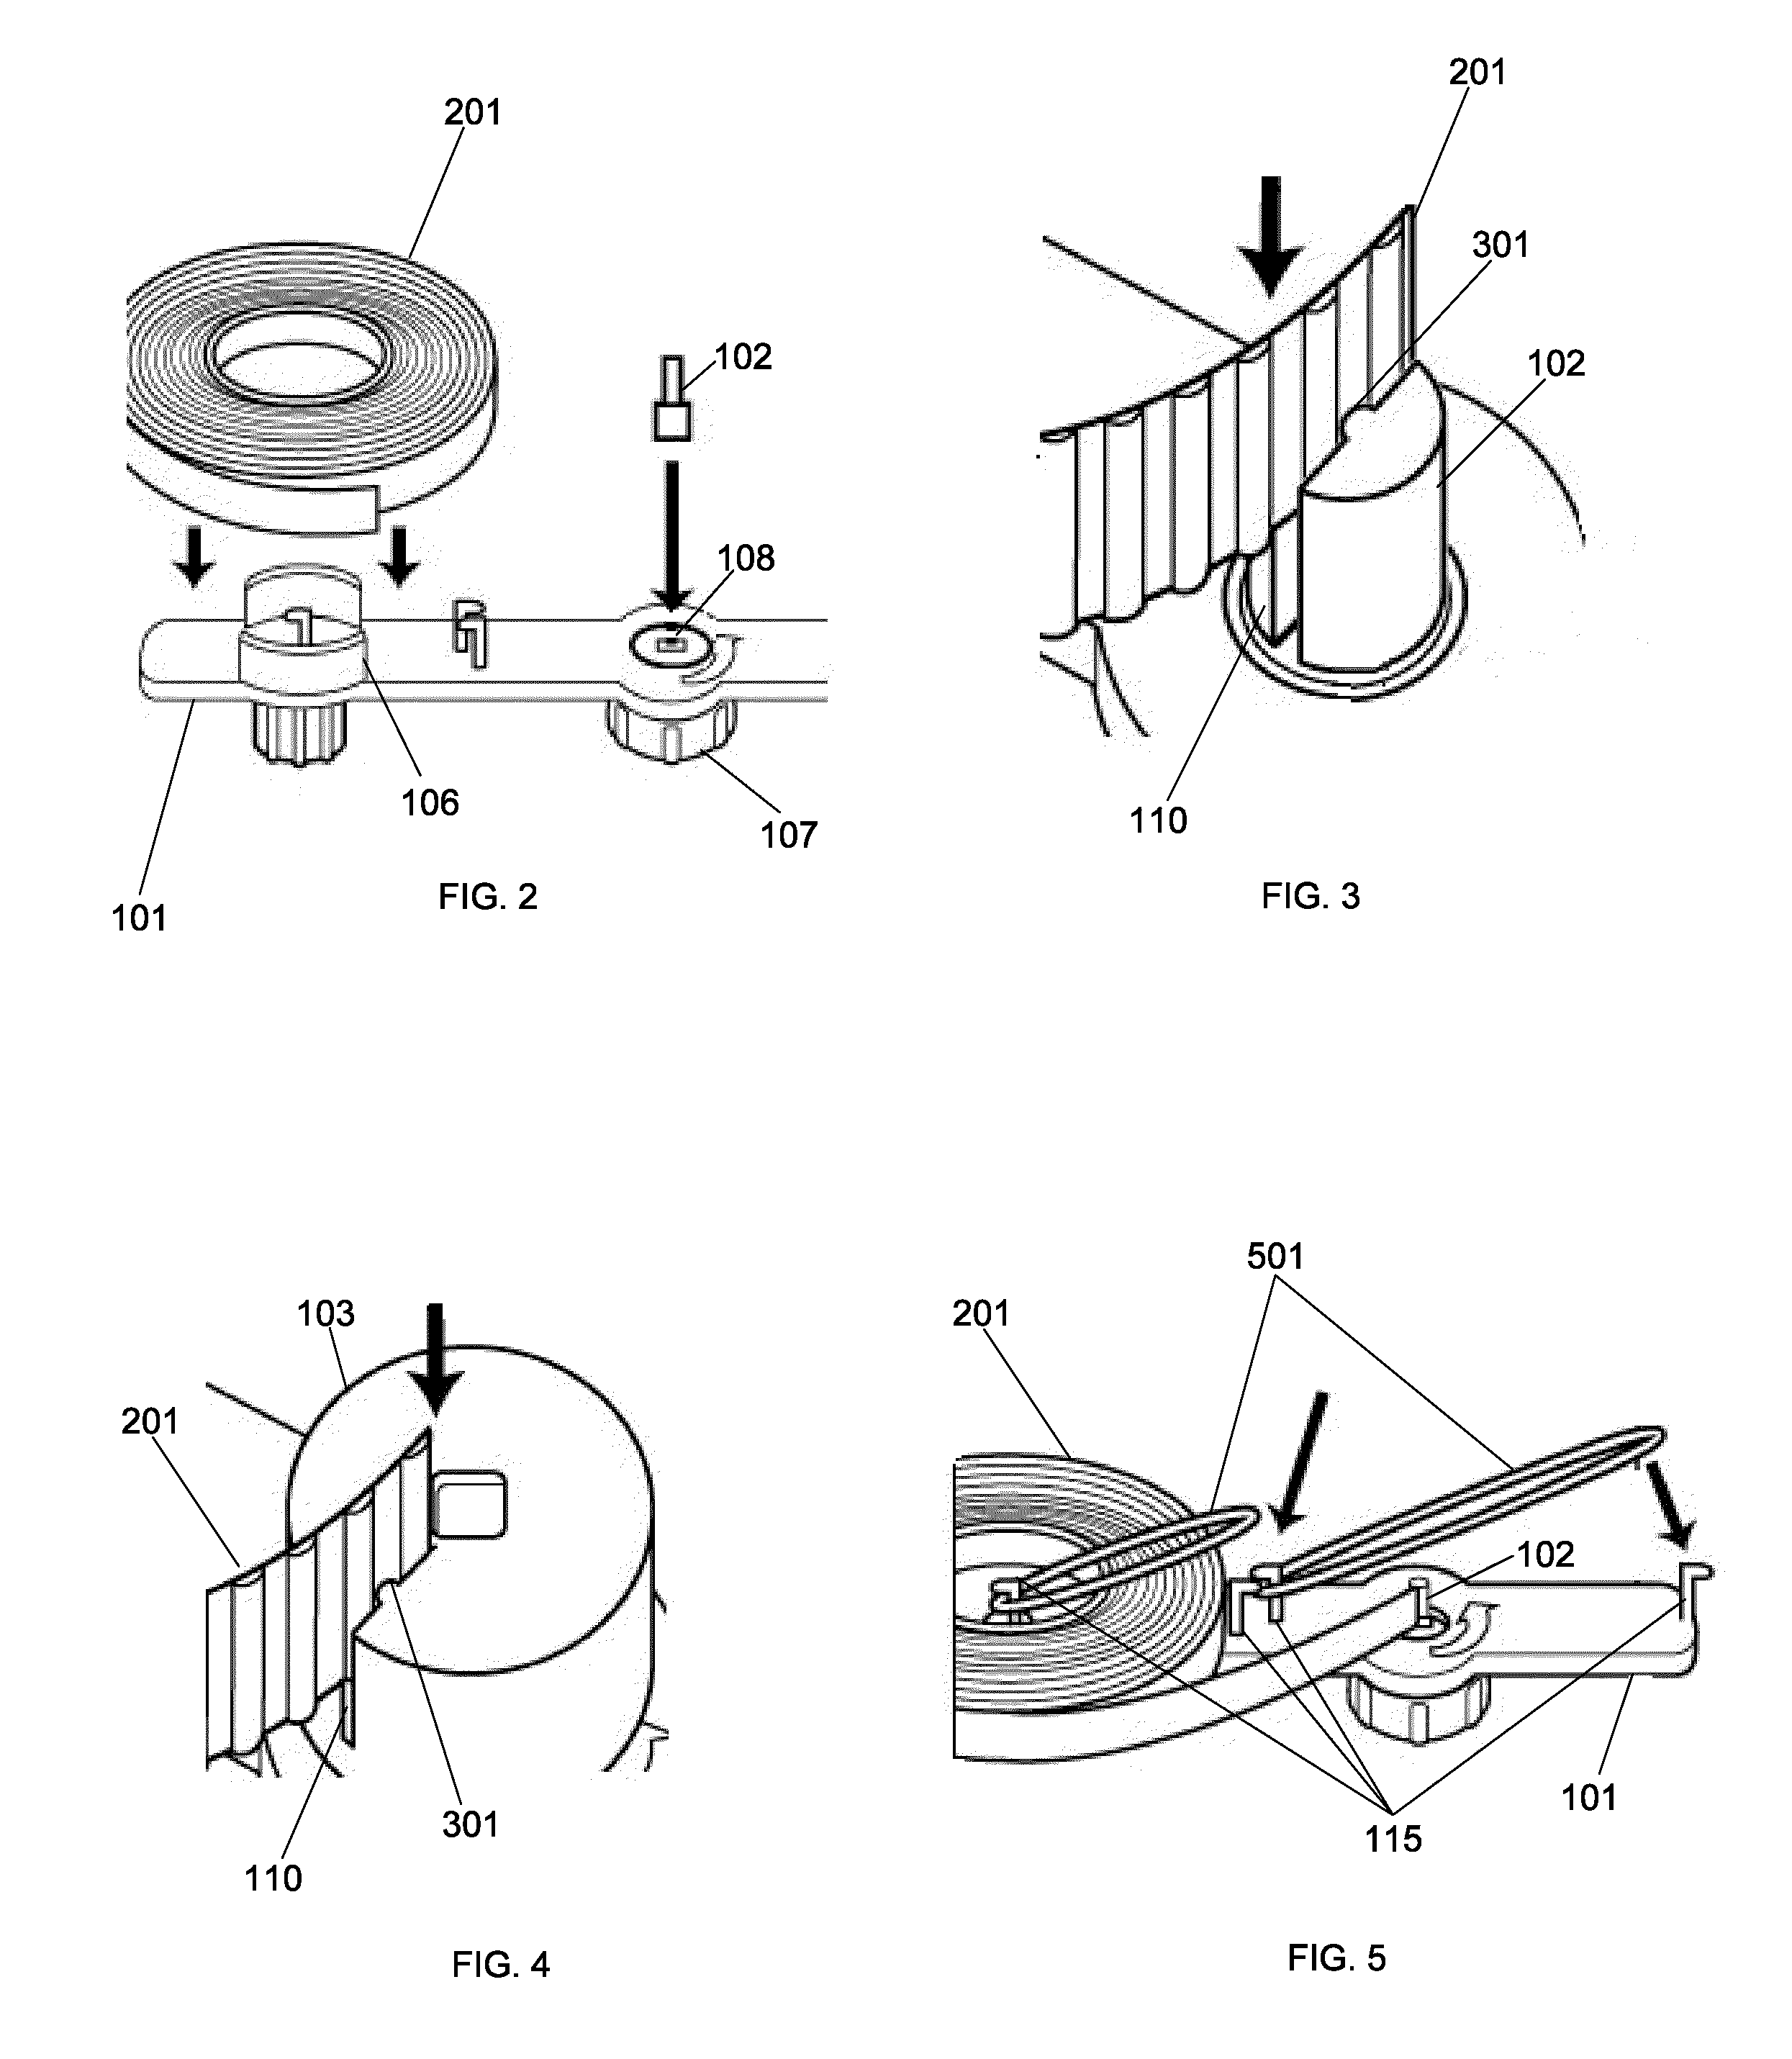 Method and apparatus for creating and connecting paper shapes with quilled paper